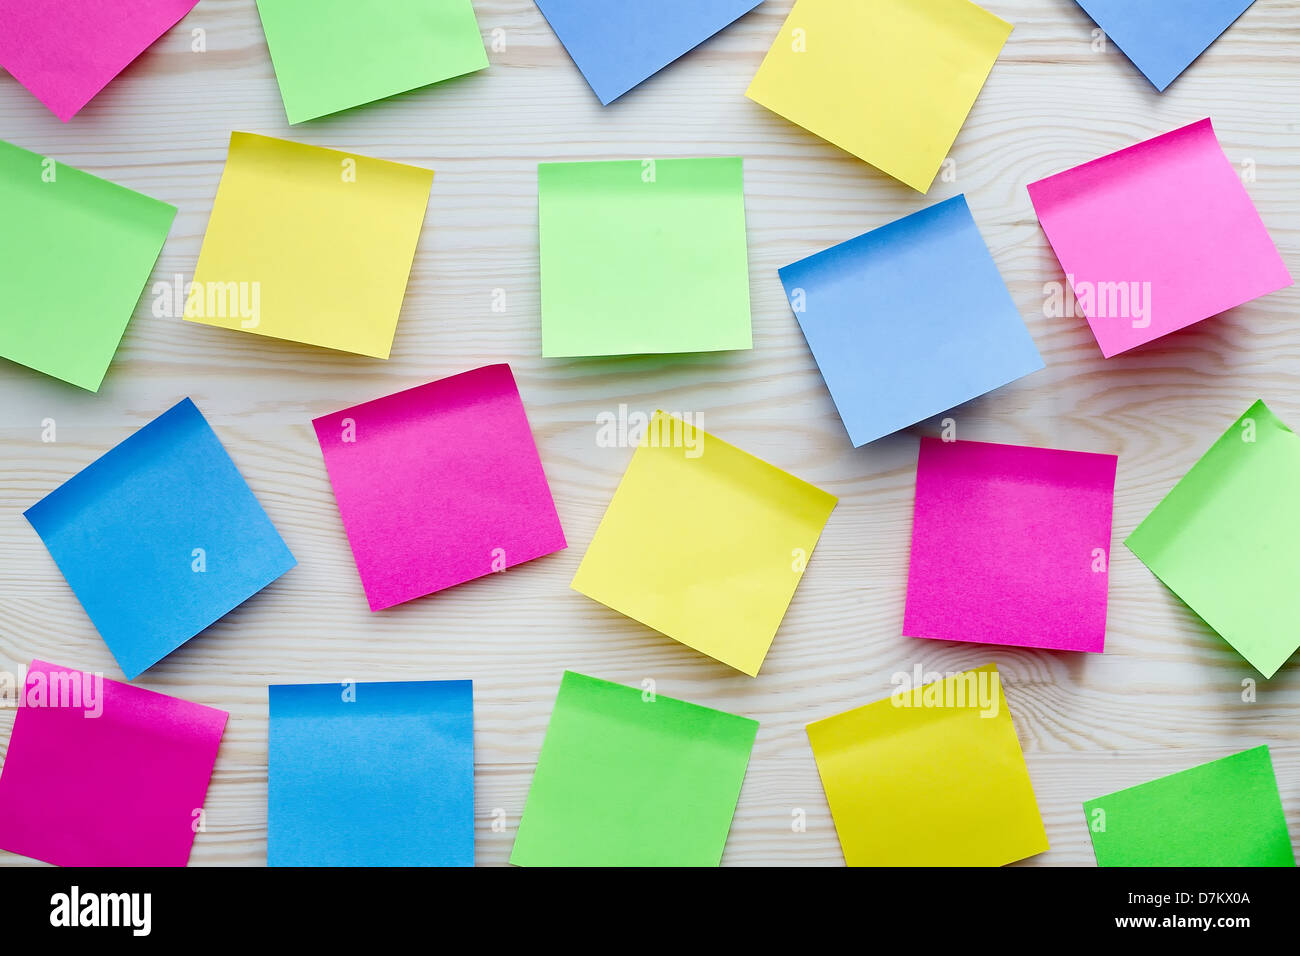 Sticky Notes Images  Free Photos PNG Stickers Wallpapers  Backgrounds   rawpixel